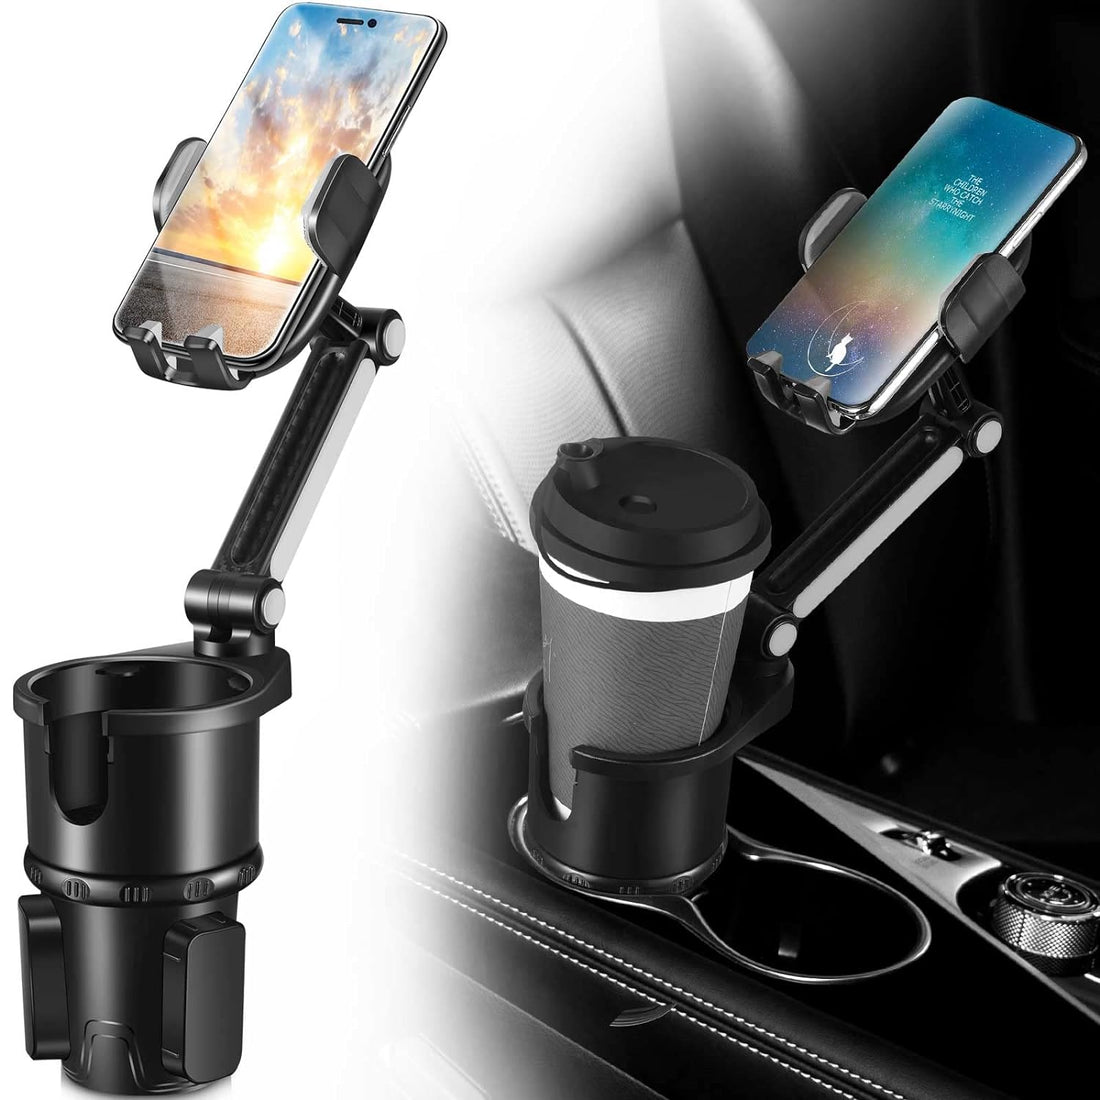 Car Cup Holder with Cellphone Mount Adjustable Cup Holder Expander 2 in 1 Multifunctional Car Cup Holder Organizer Universal 360 Degree Rotation Base Automotive Cup Holders (7.9 x 5.4 x 3.4 Inches)